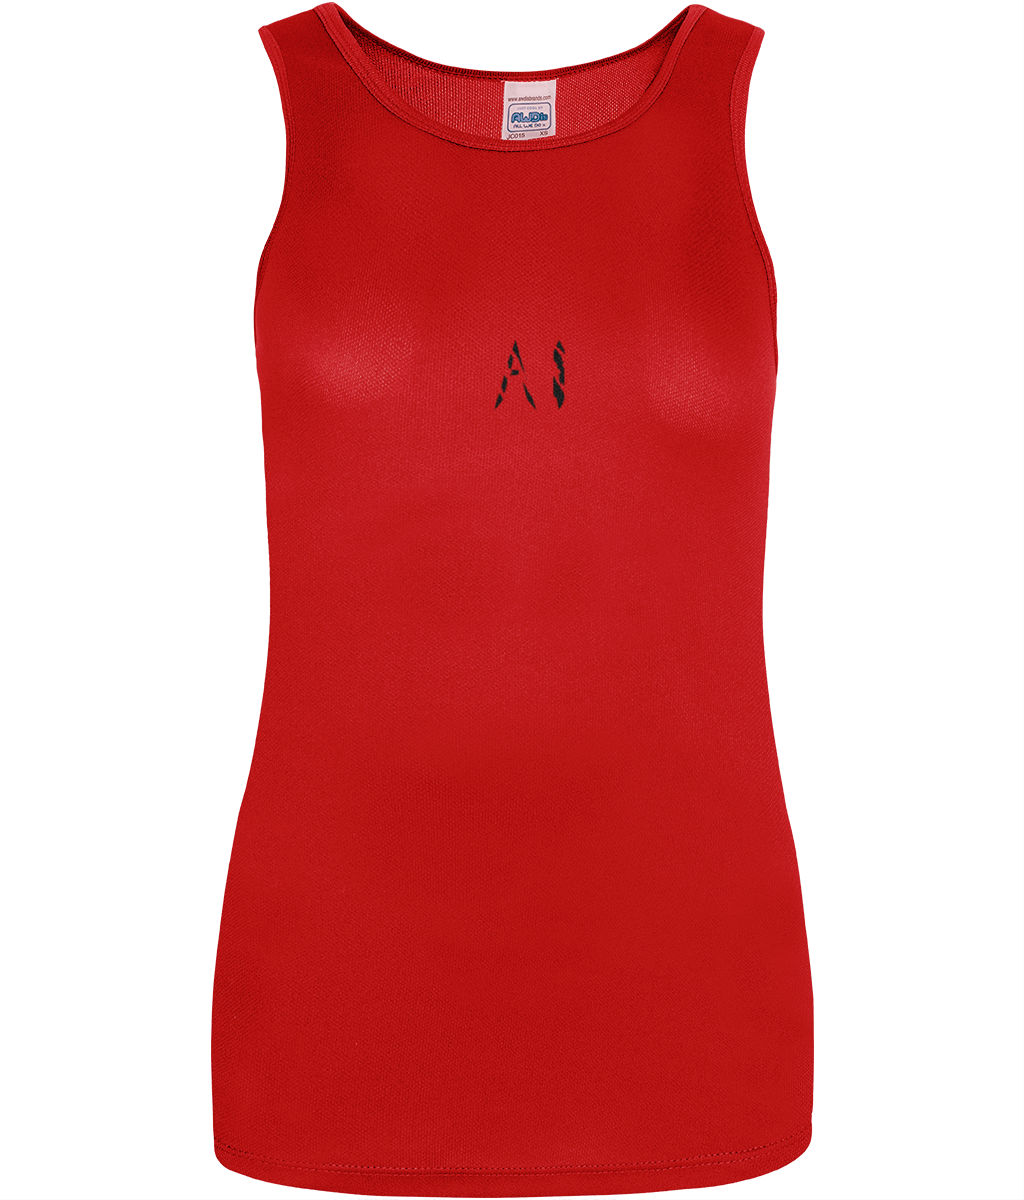 Womens Red Workout Sports Vest with Black AI logo in centre chest